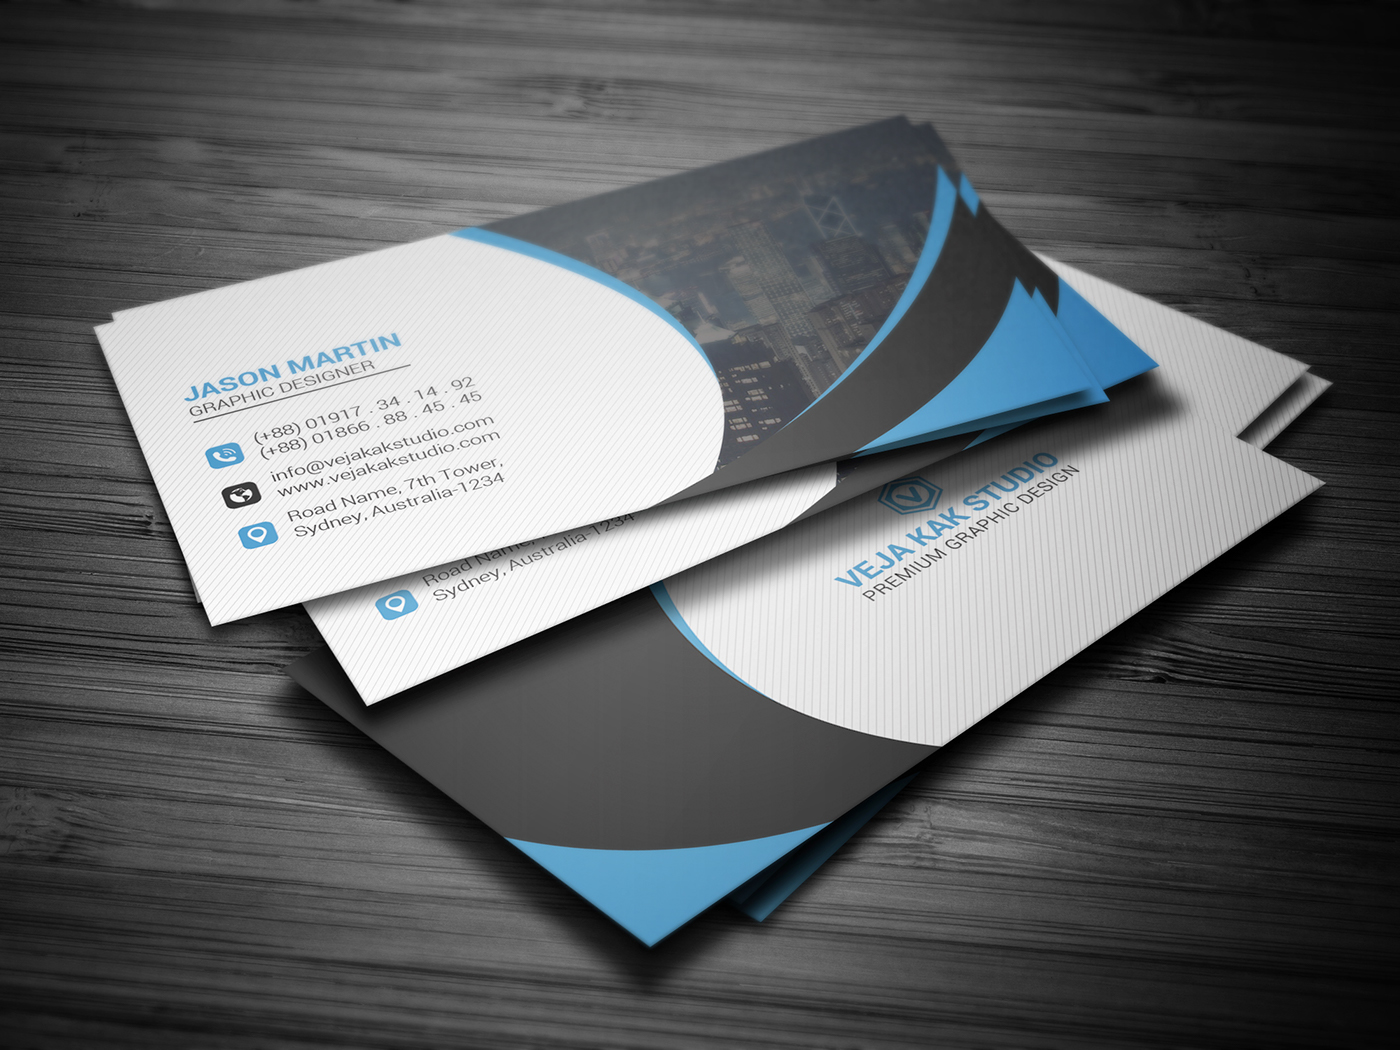 Free Business Cards Business Cards corporate business cards free download cards free visiting cards freebie business cards free download name cards freebie